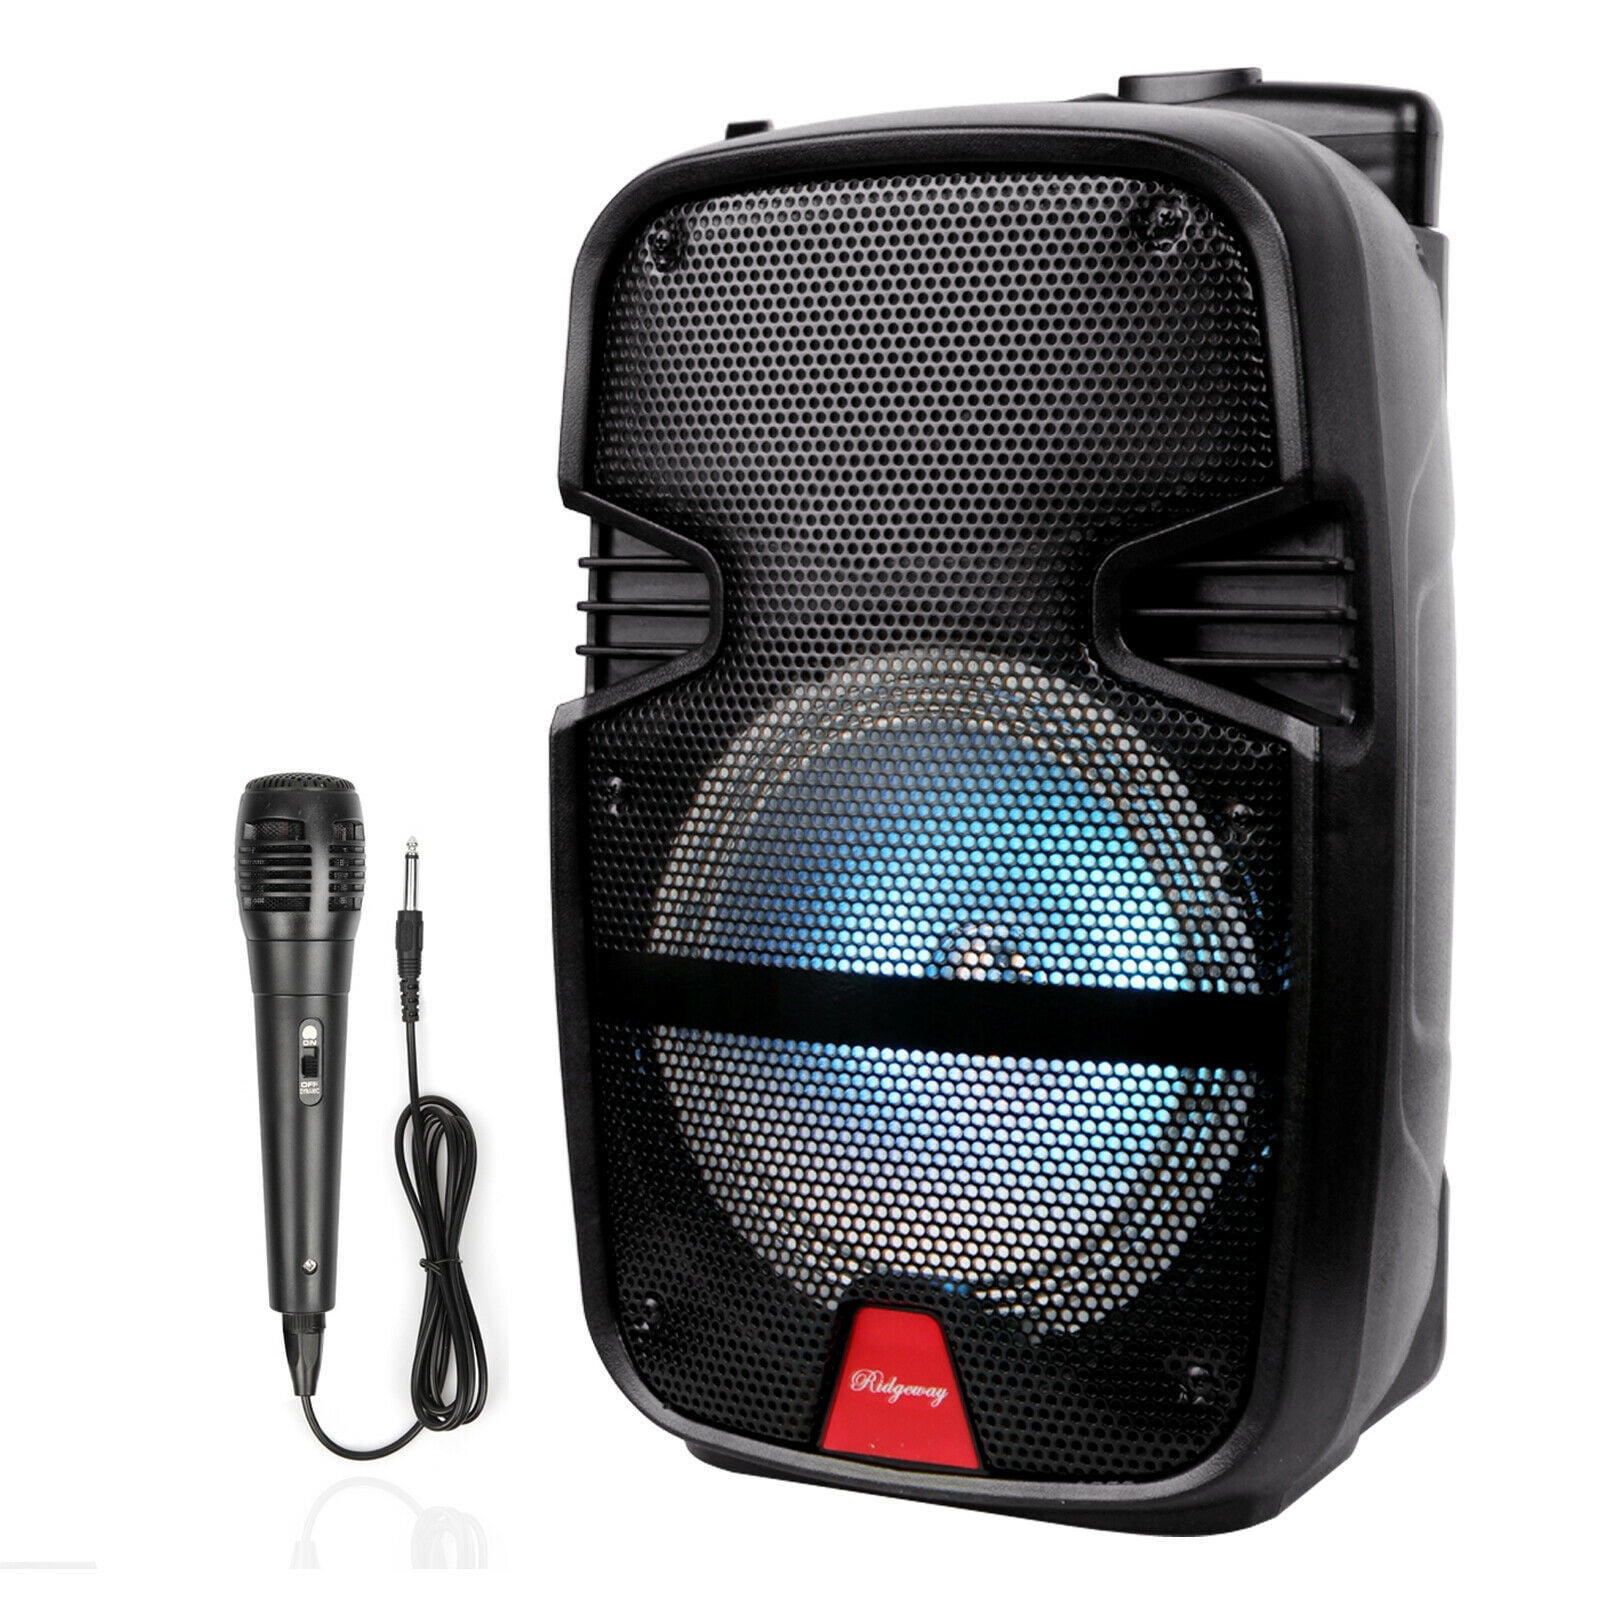 8" Portable BT Bluetooth Speaker Subwoofer Heavy Bass System Party With Microphone and Remote - Walmart.com